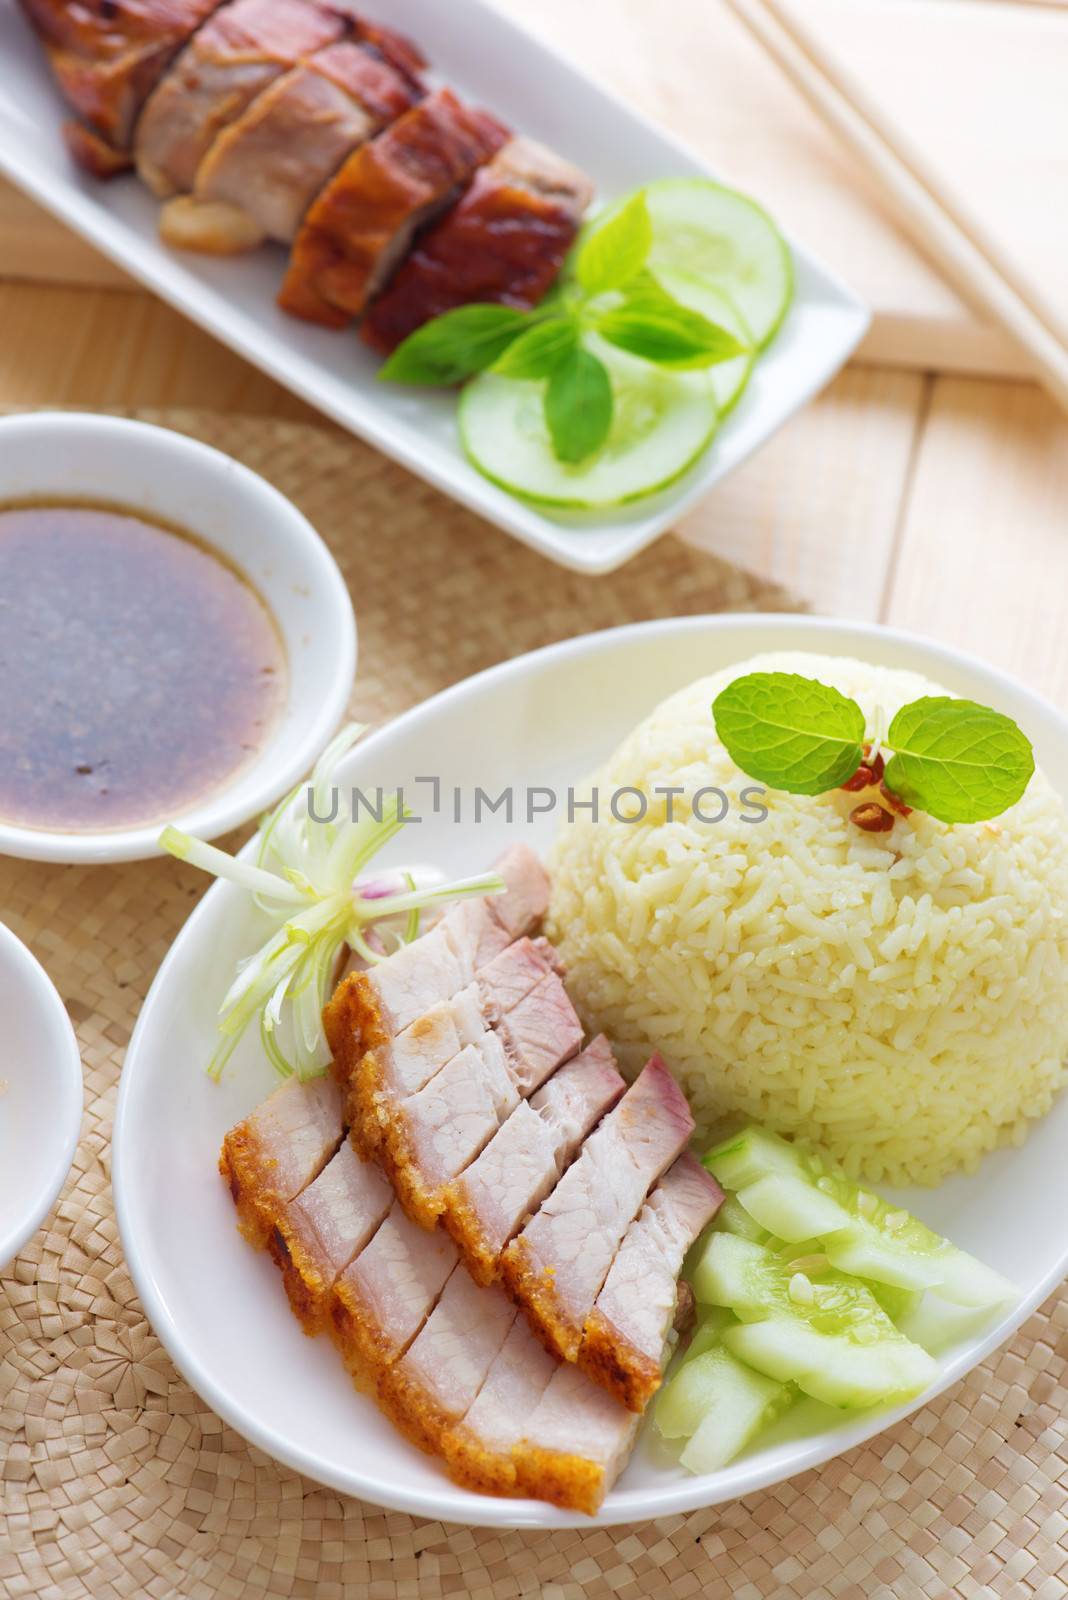 Siu Yuk or crispy roasted belly pork Chinese style and roast duck, served with steamed rice. Singapore Chinese cuisines.